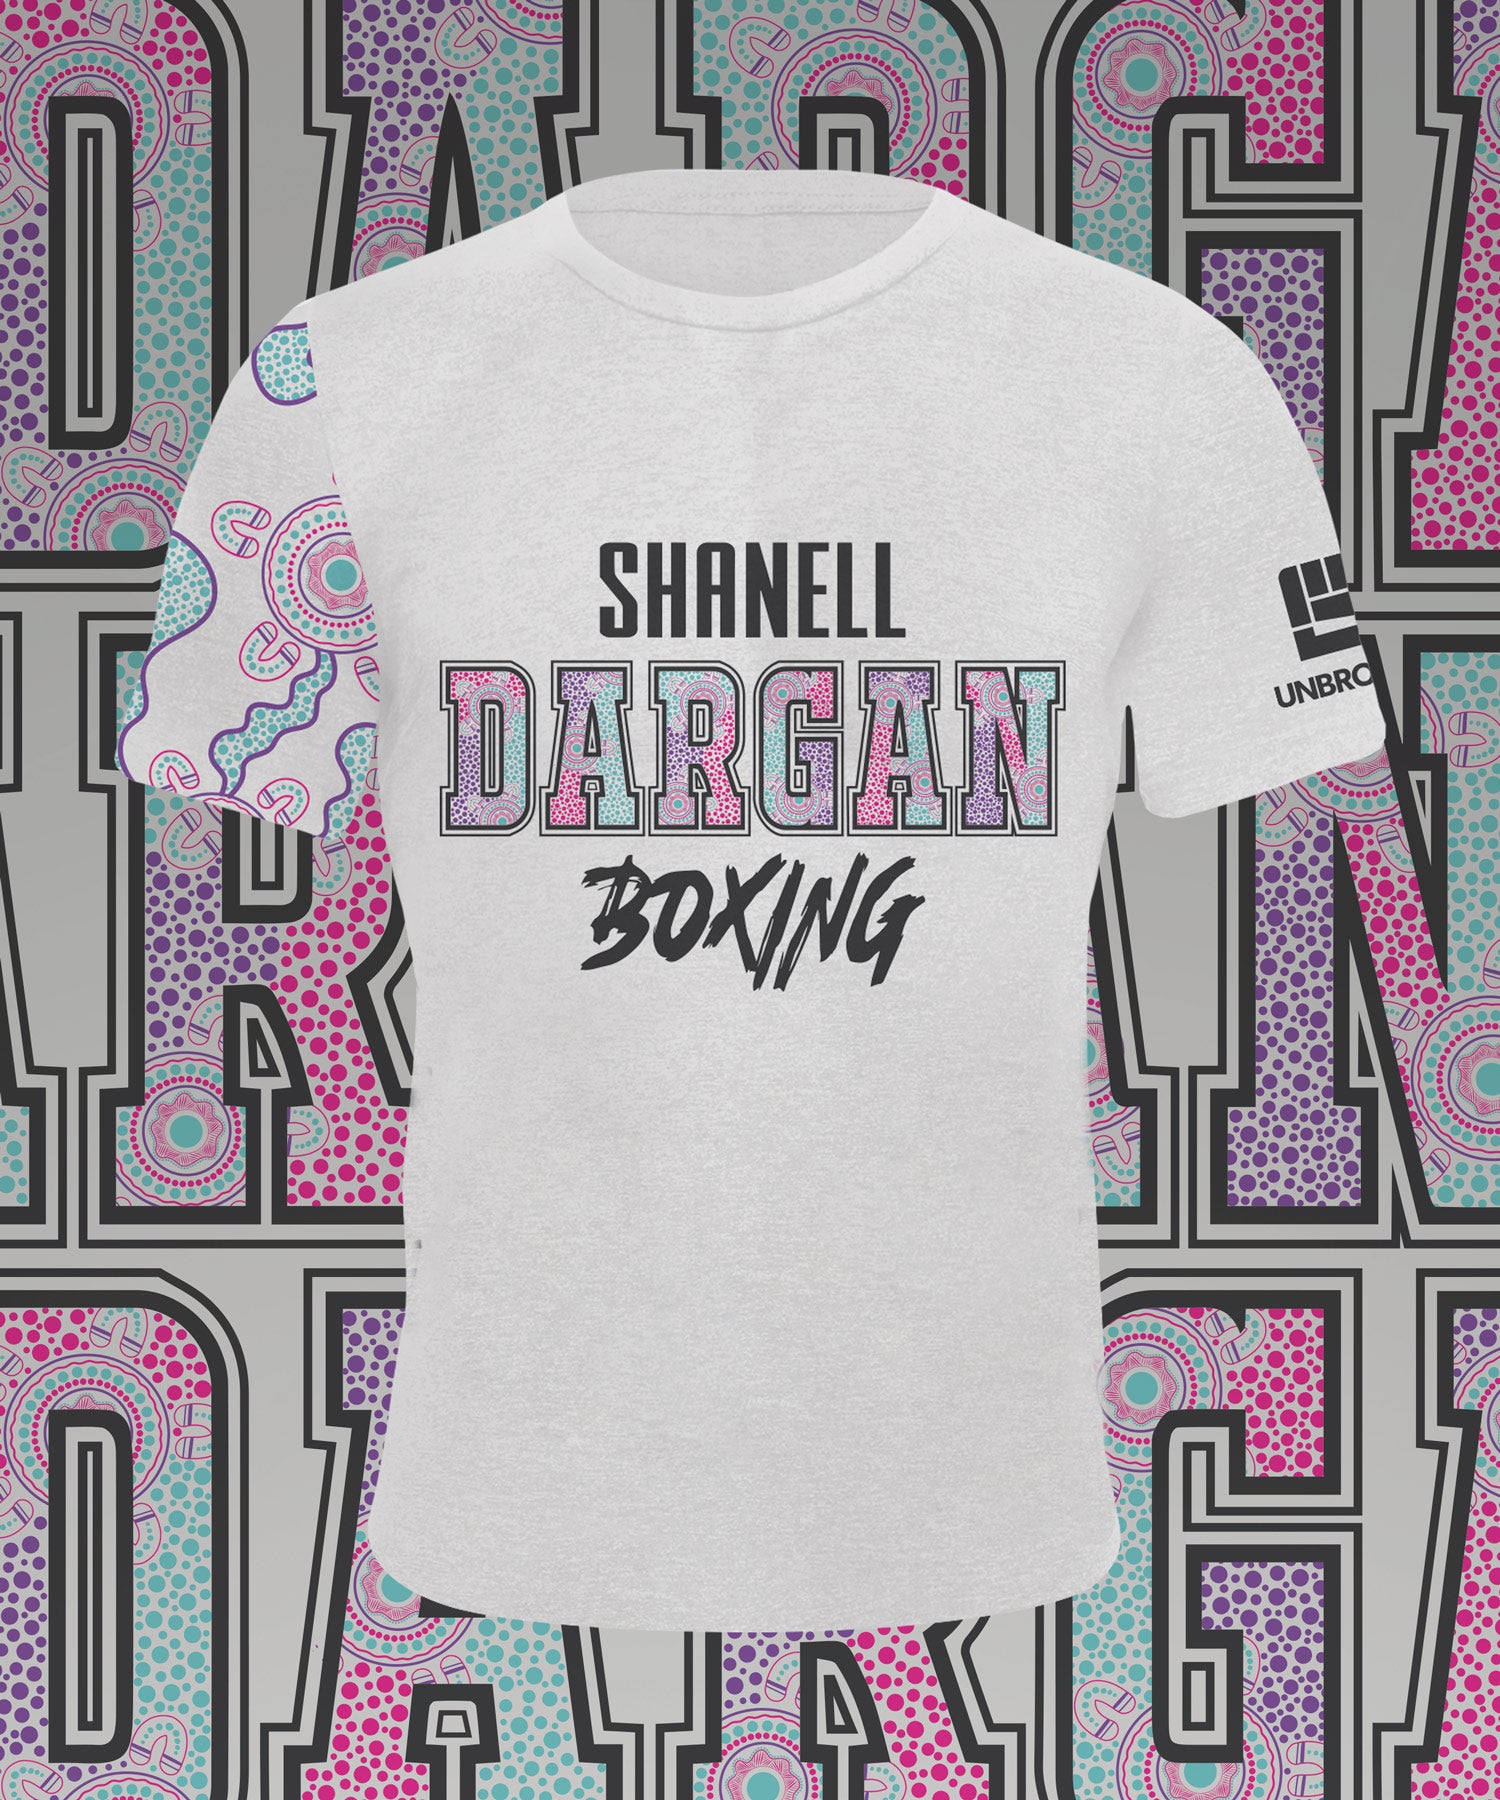 SHANELL DARGAN Performance Tee in White